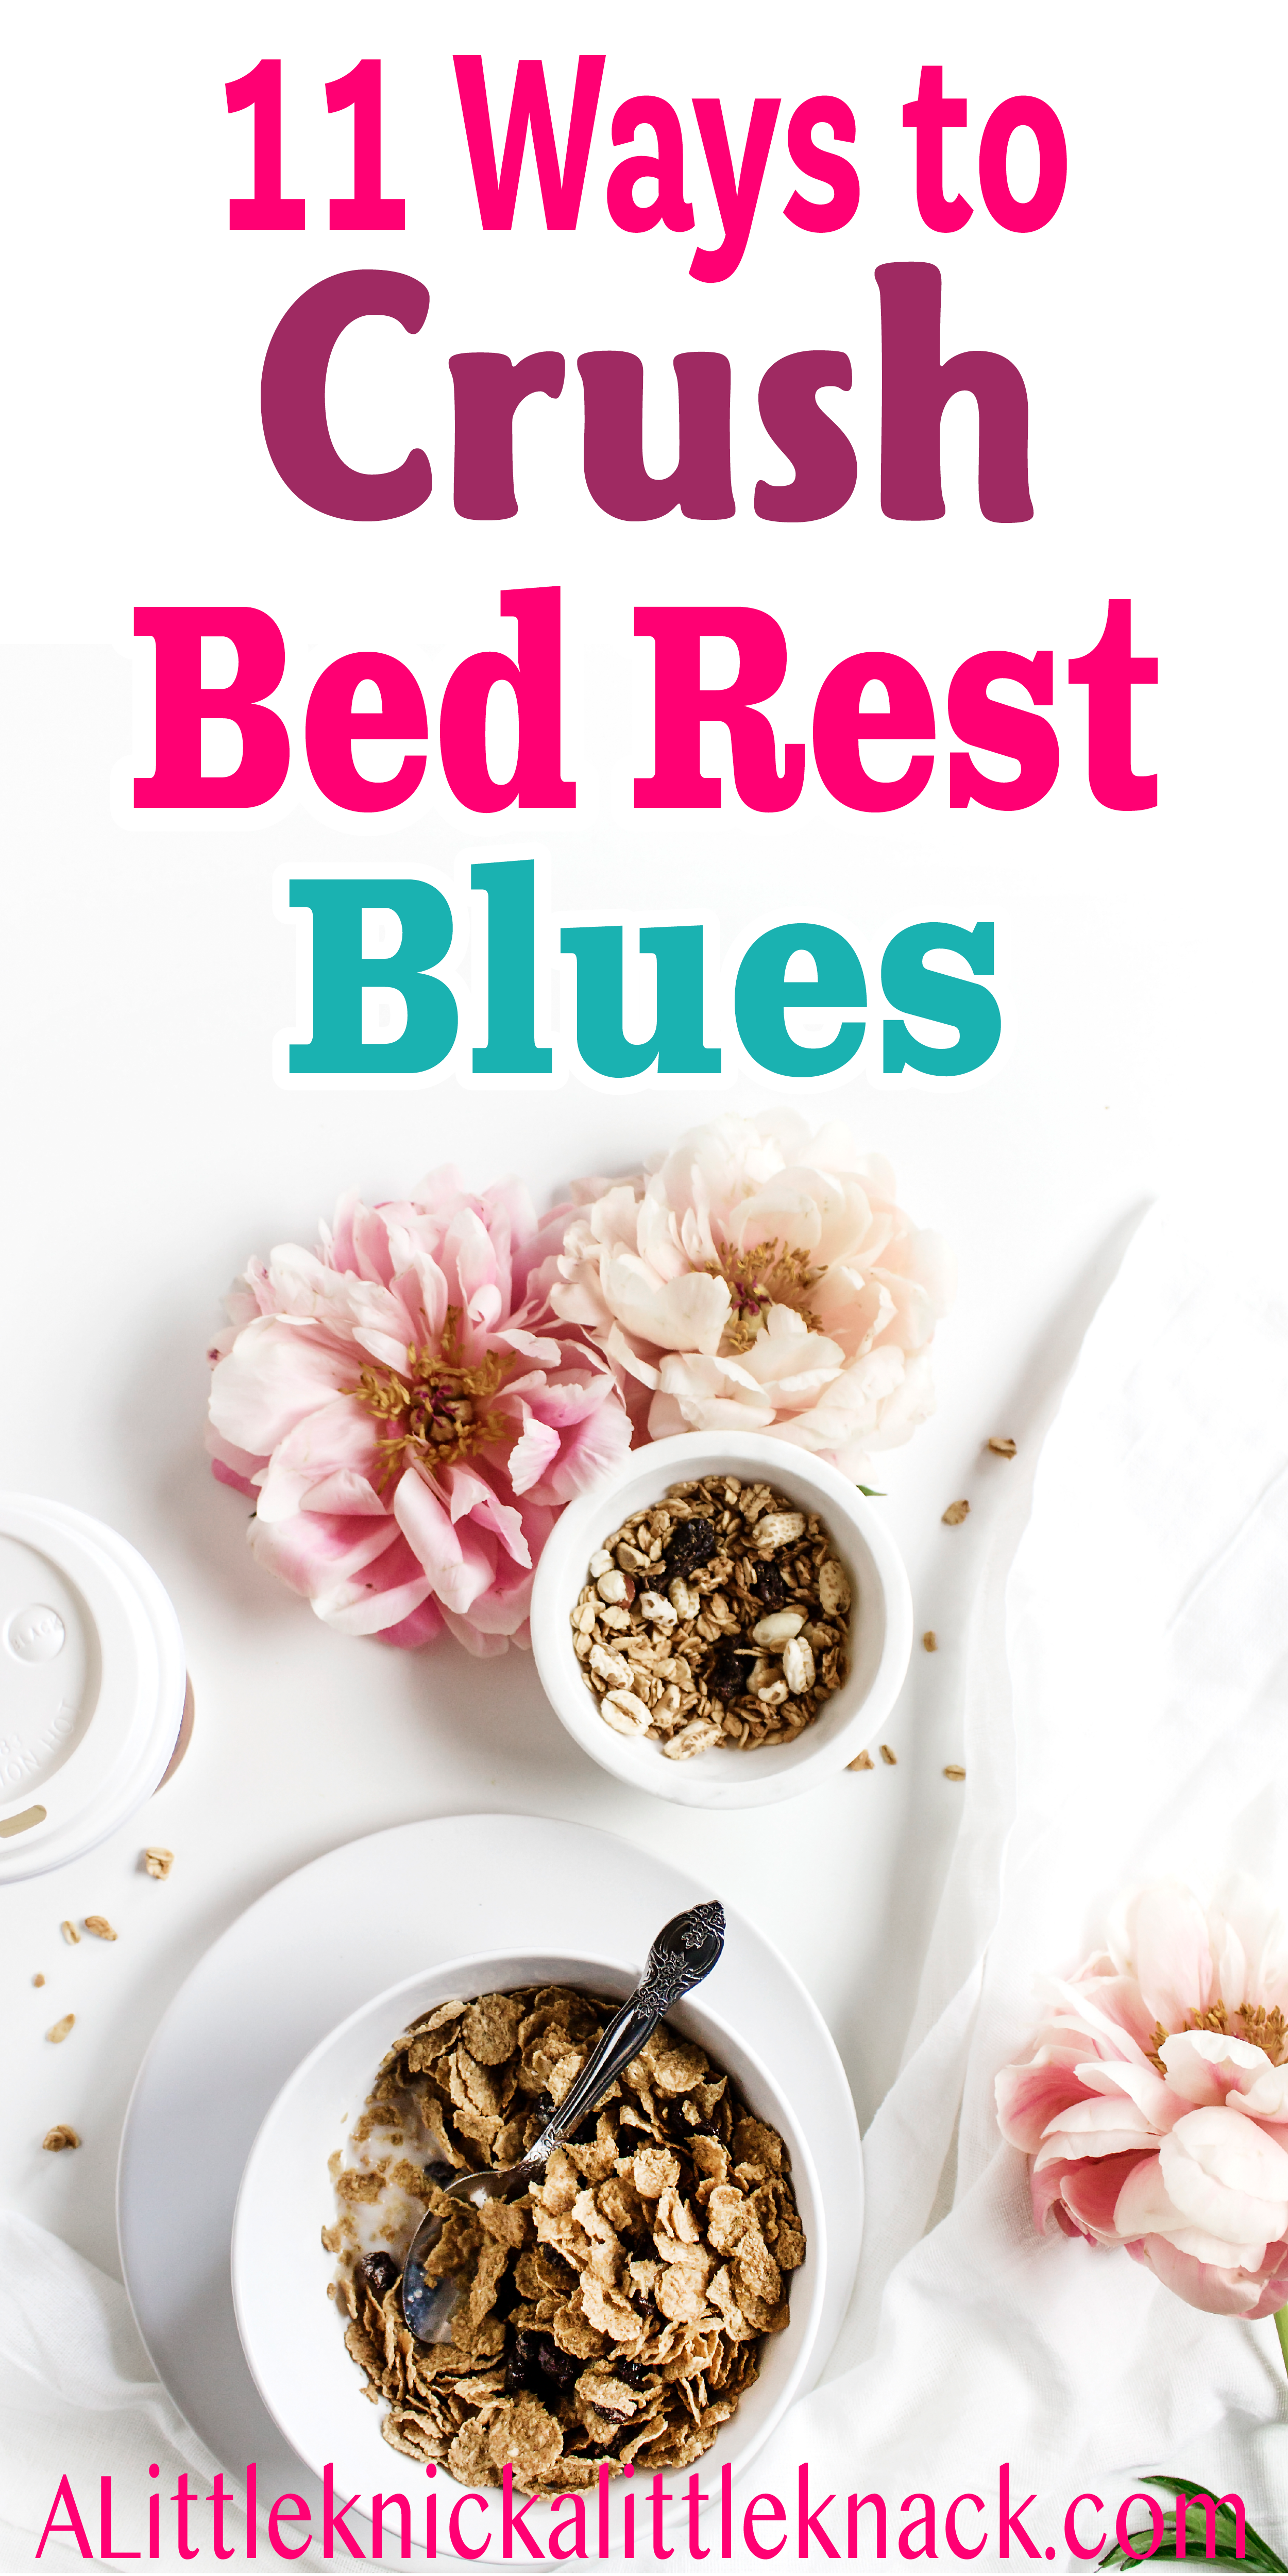 Bowls of cereal and beautiful flowers next to a white bedsheet with a text overlay